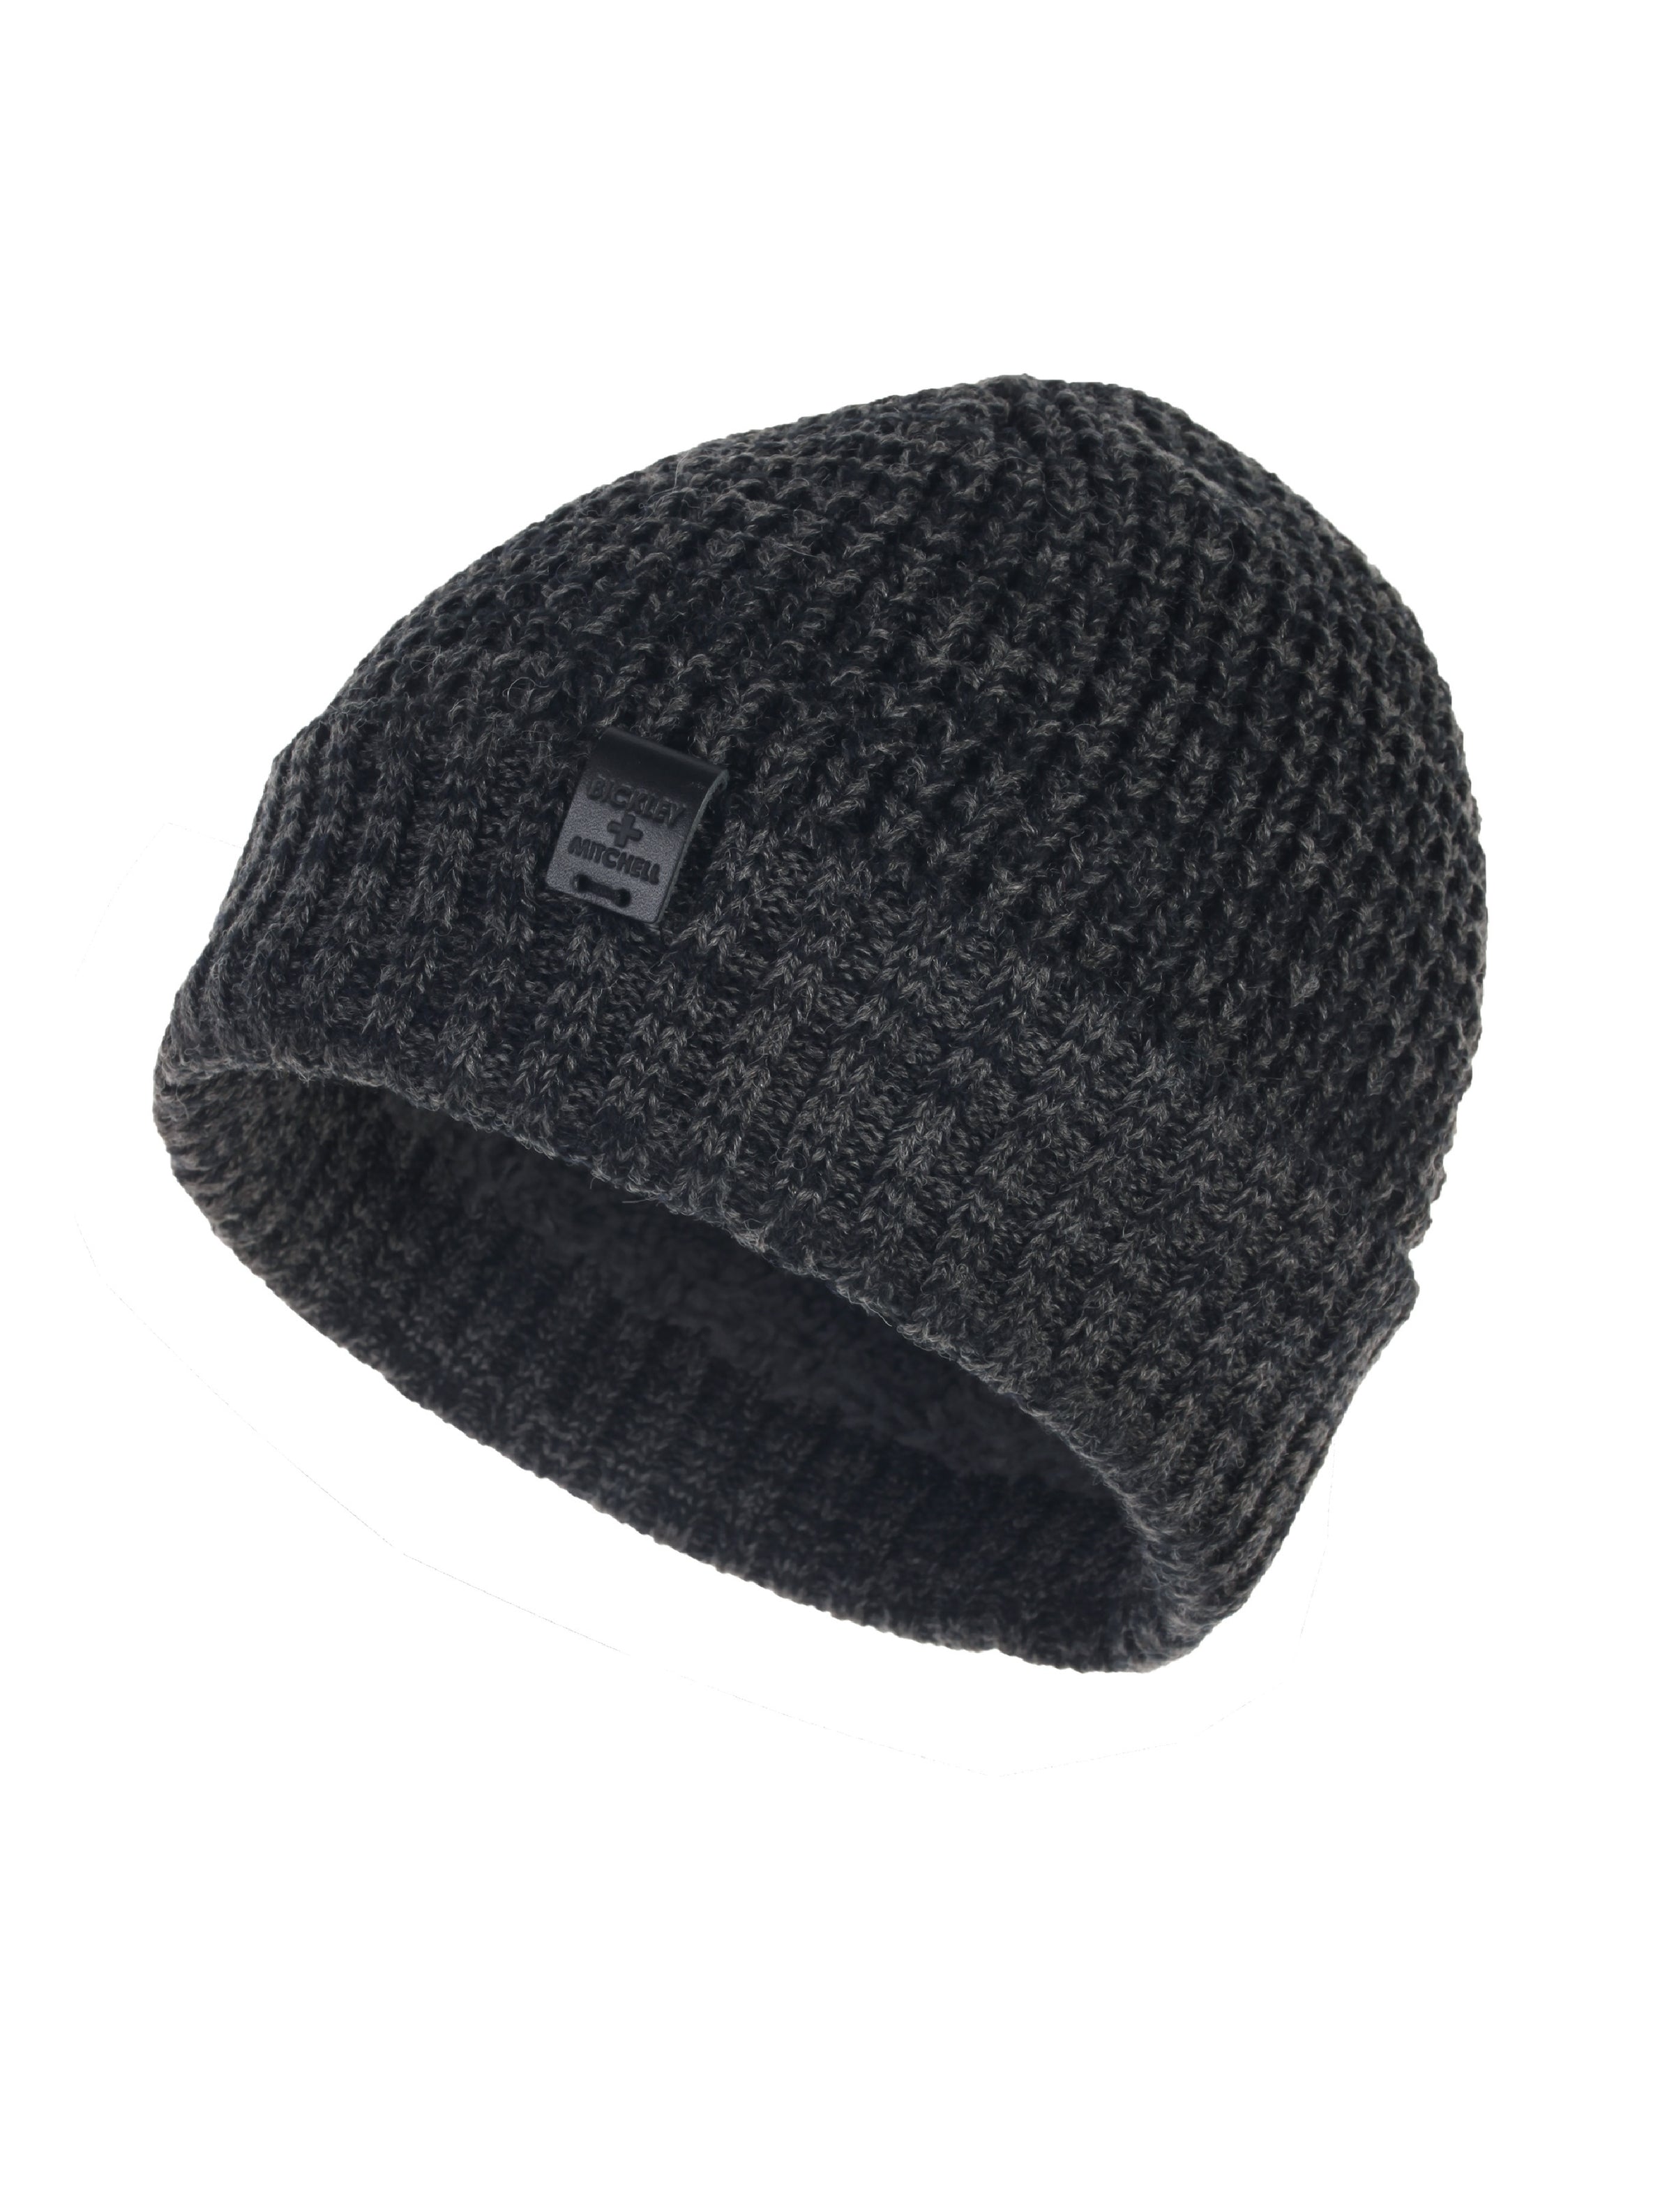 Bickley + Mitchell Sherpa Lined Interior Thick Knit Cuffed Beanie